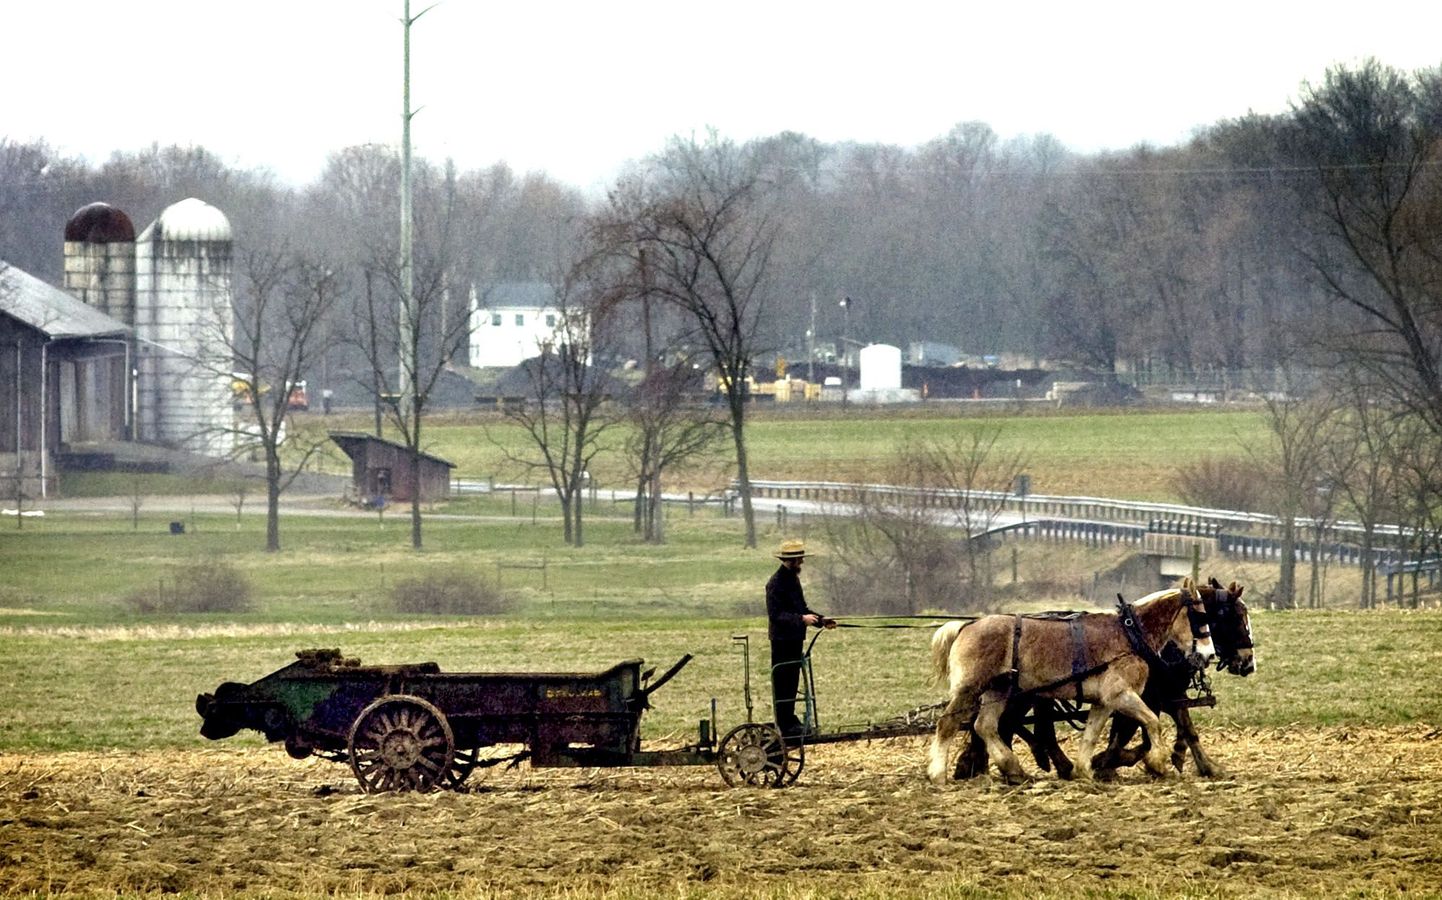 An Amish farmer drives a team of horses pulling a manure spreader across a field for an early-spring application of fertilizer in Anthony Township, near Washingtonville, Pa., on Monday morning, March 22, 2010. (AP Photo/Bloomsburg Press-Enterprise, Bill Hughes) / SCANPIX Code: 436